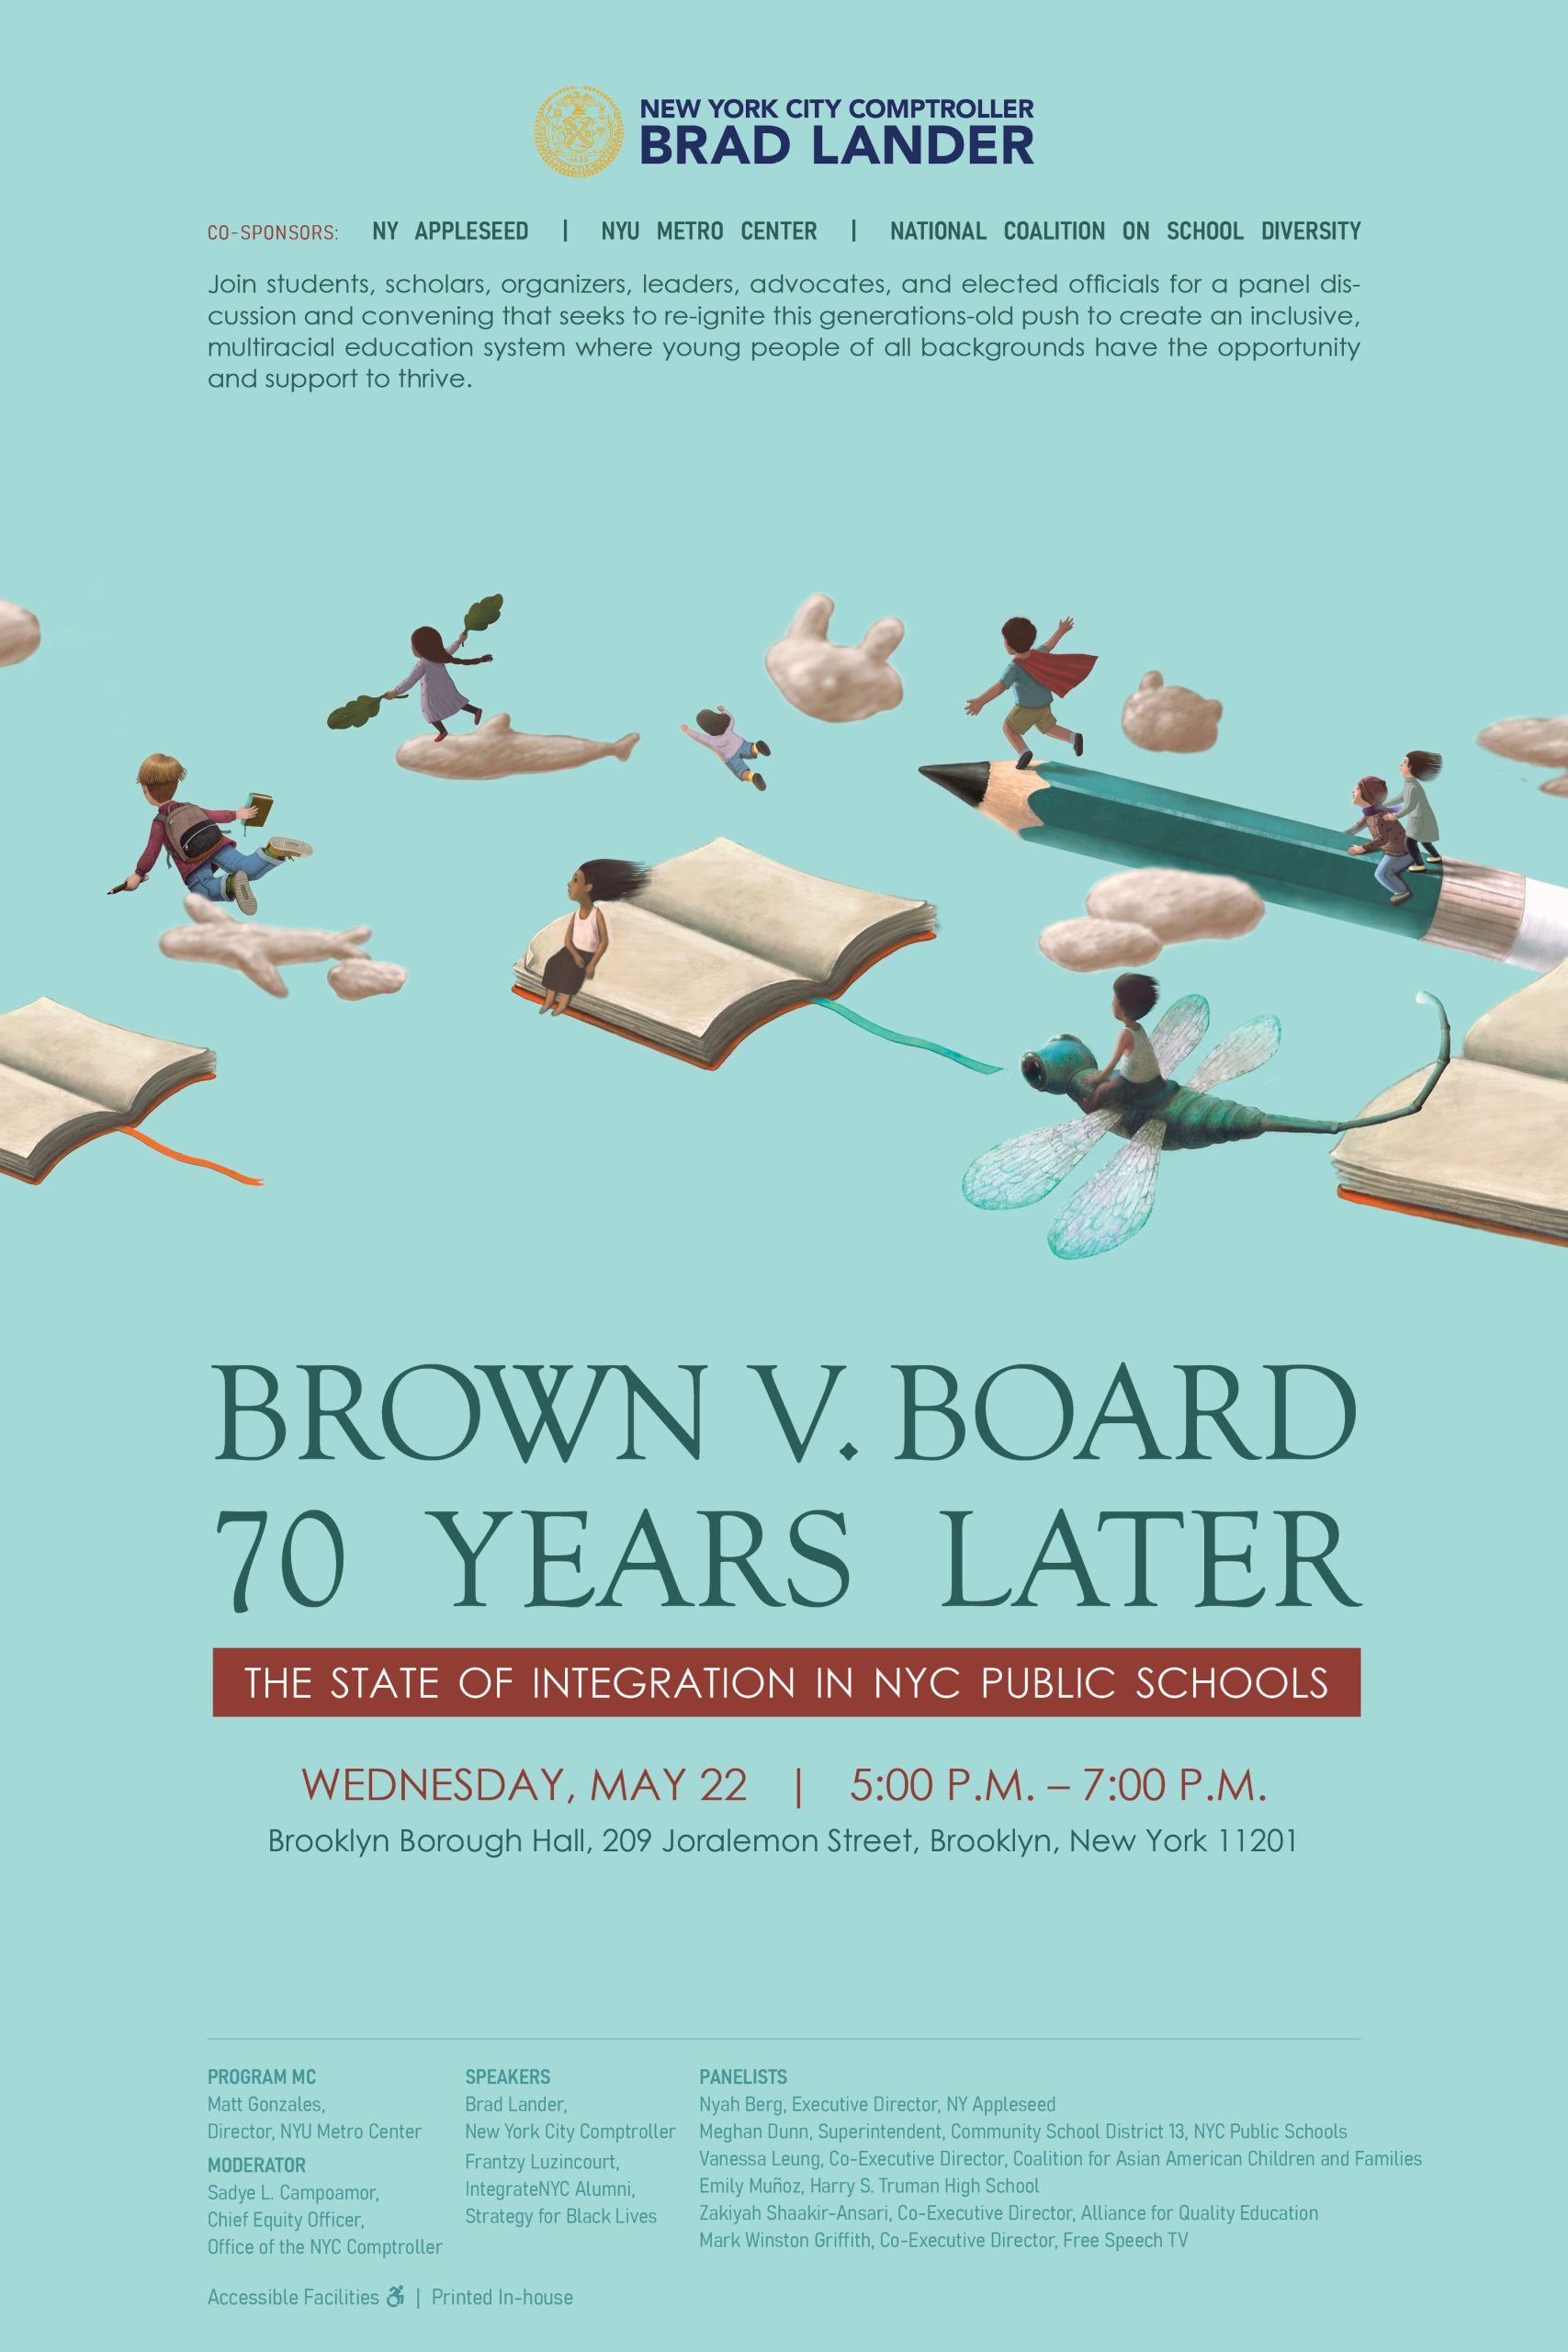 Brown v. Board 70 Years Later